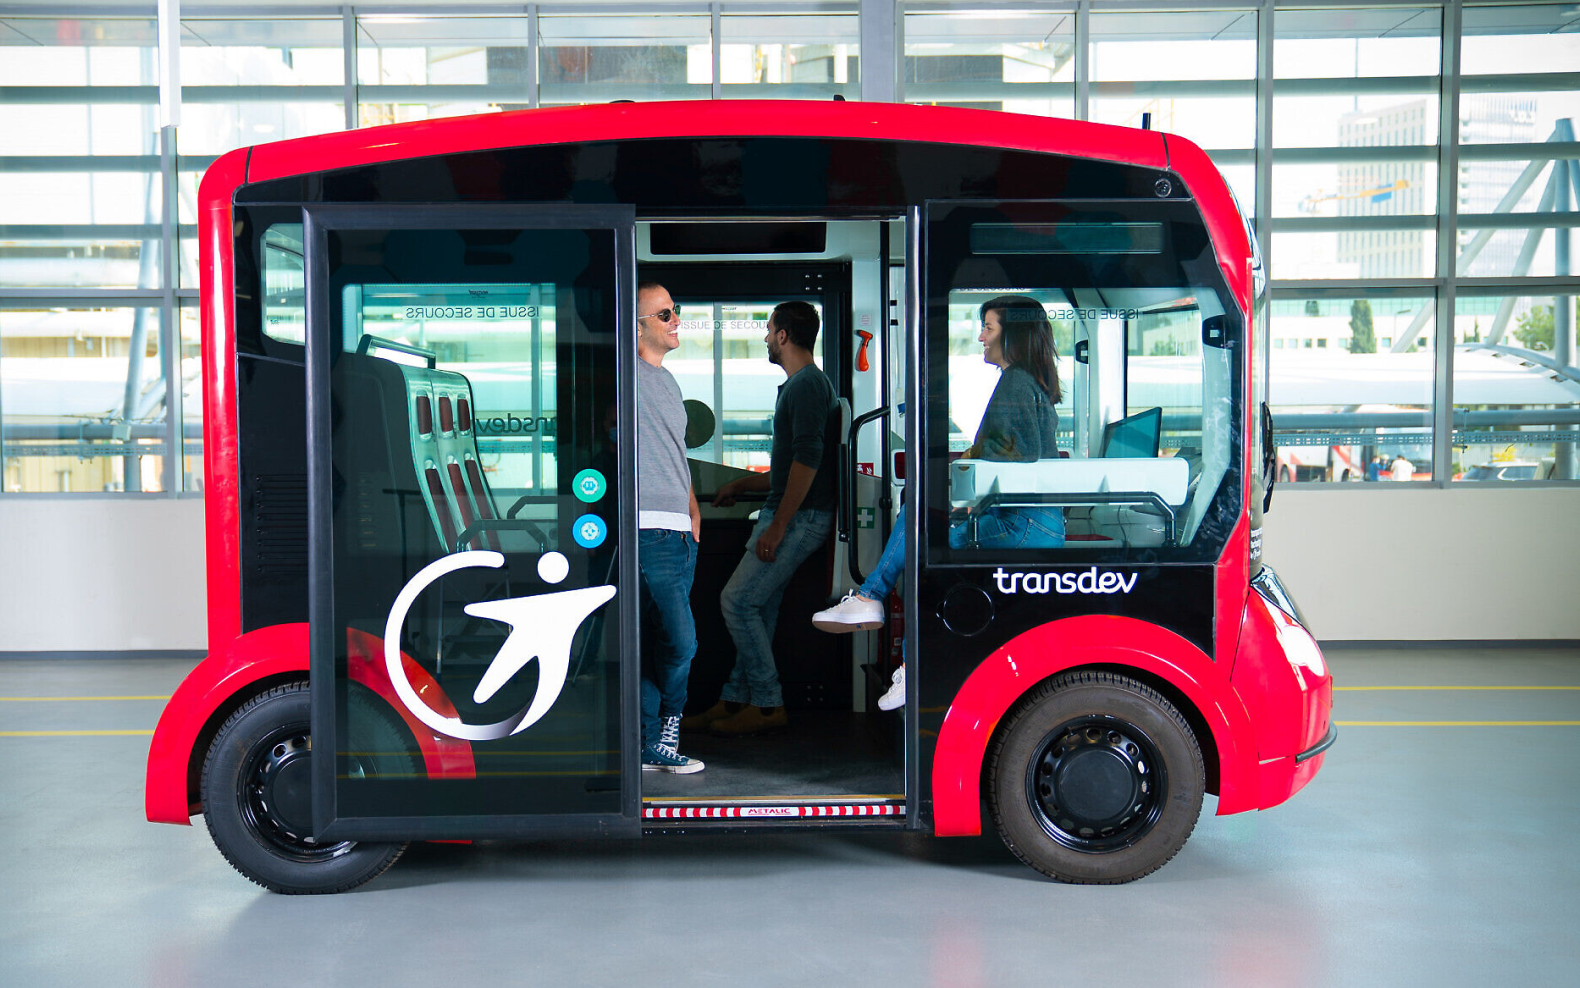 A public shuttle transport named Transdev Autonomous Transport System carrying people for the tour.